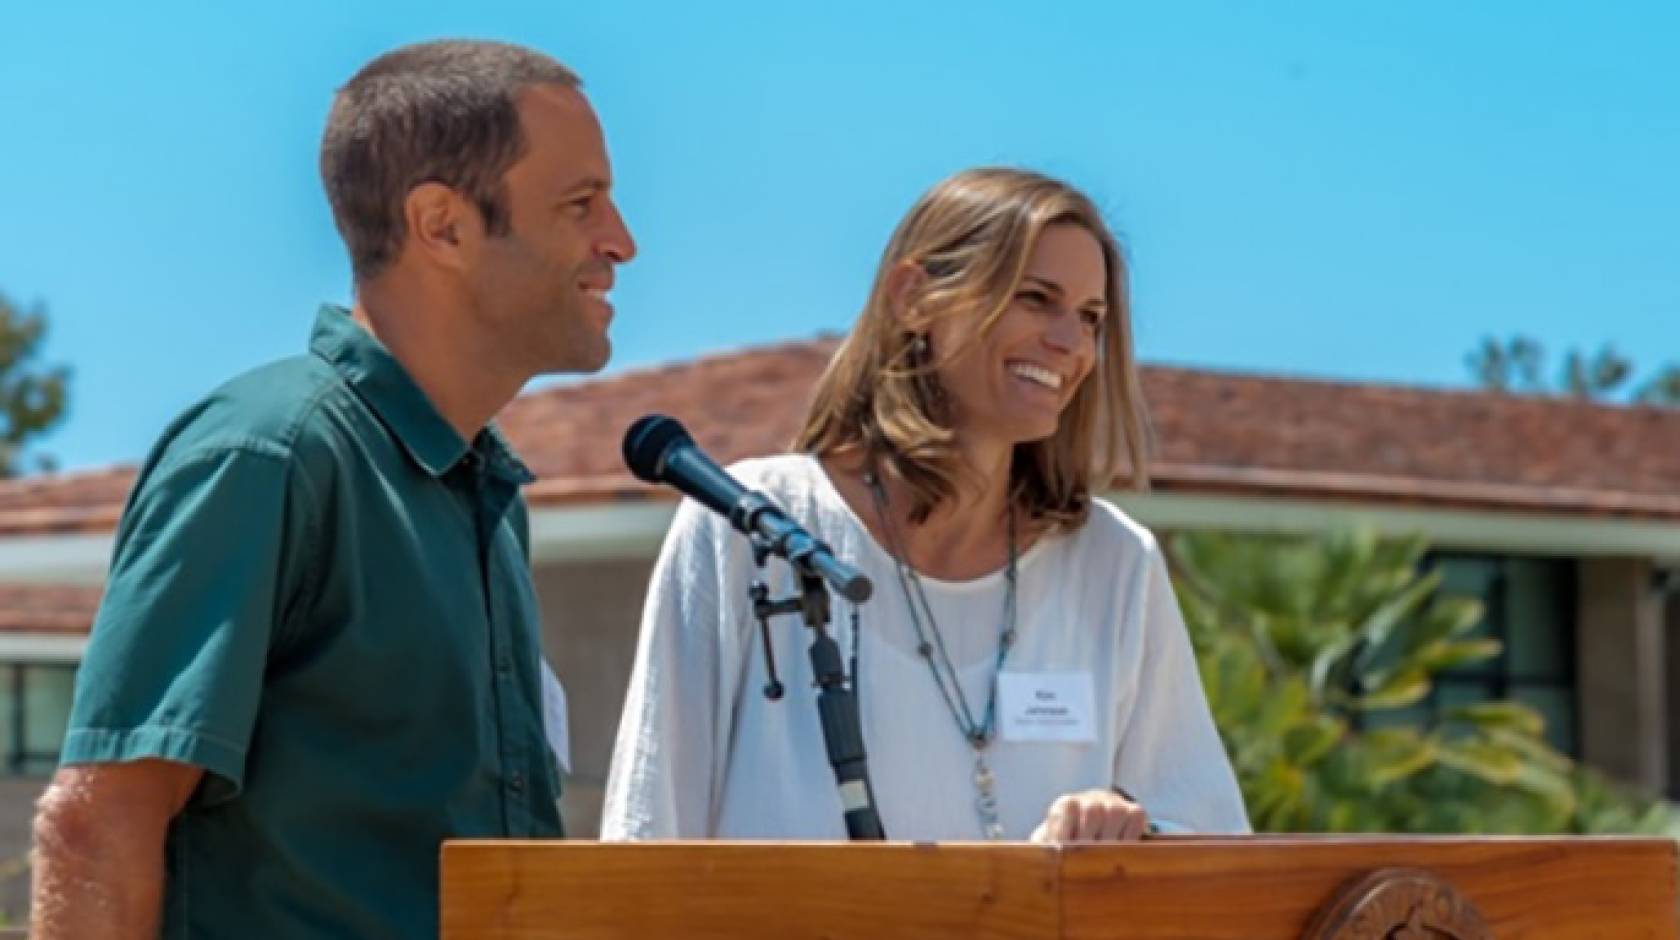 Kim and Jack Johnson helped to launch UC Santa Barbara's Edible Campus Program in 2015 with a tree-planting event at Storke Tower.